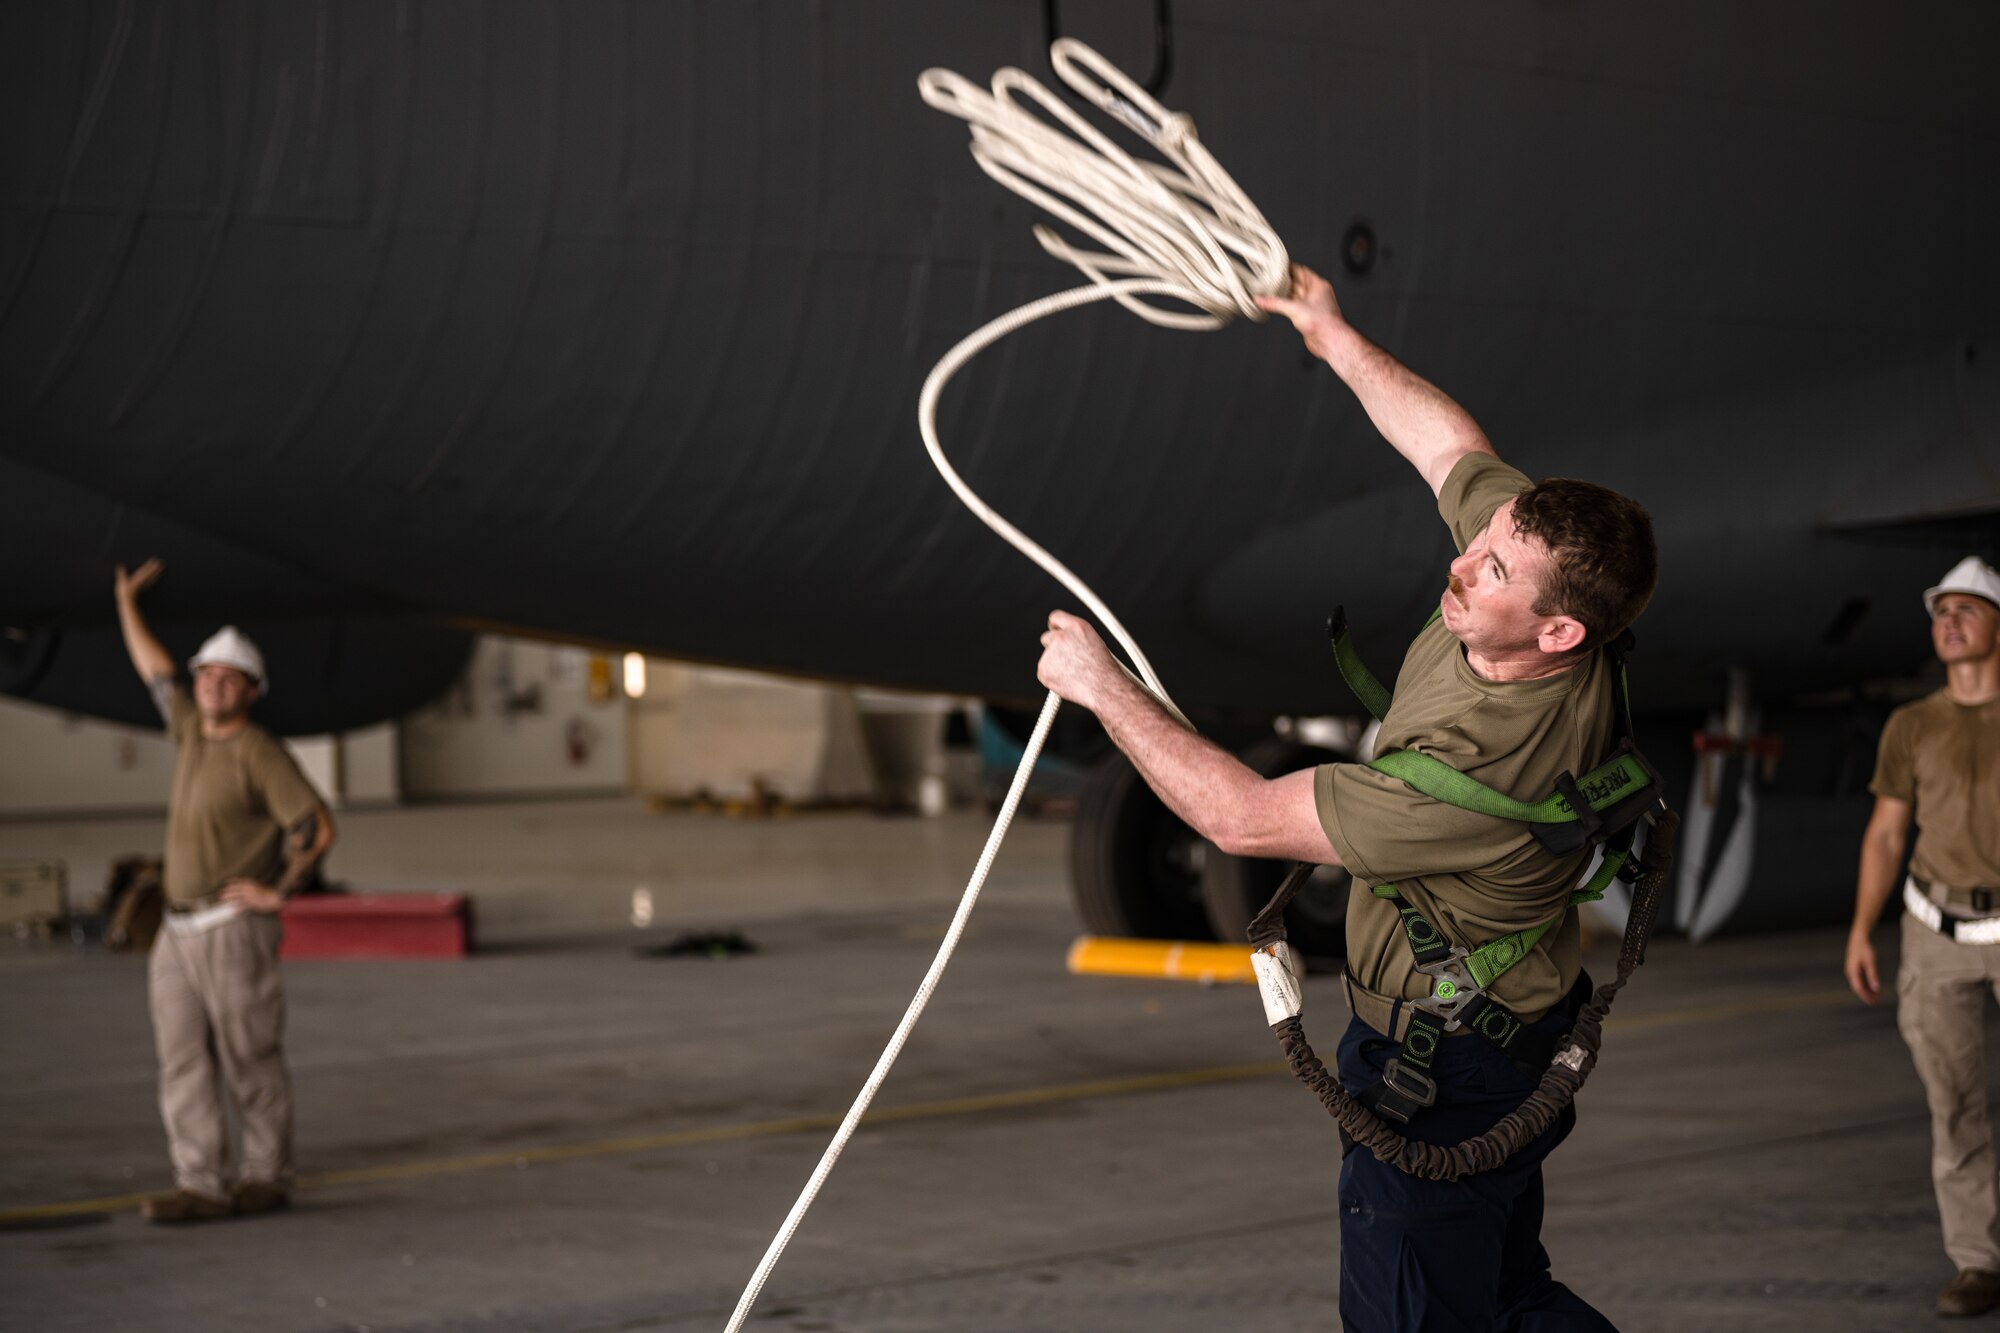 Airman tossing a rope